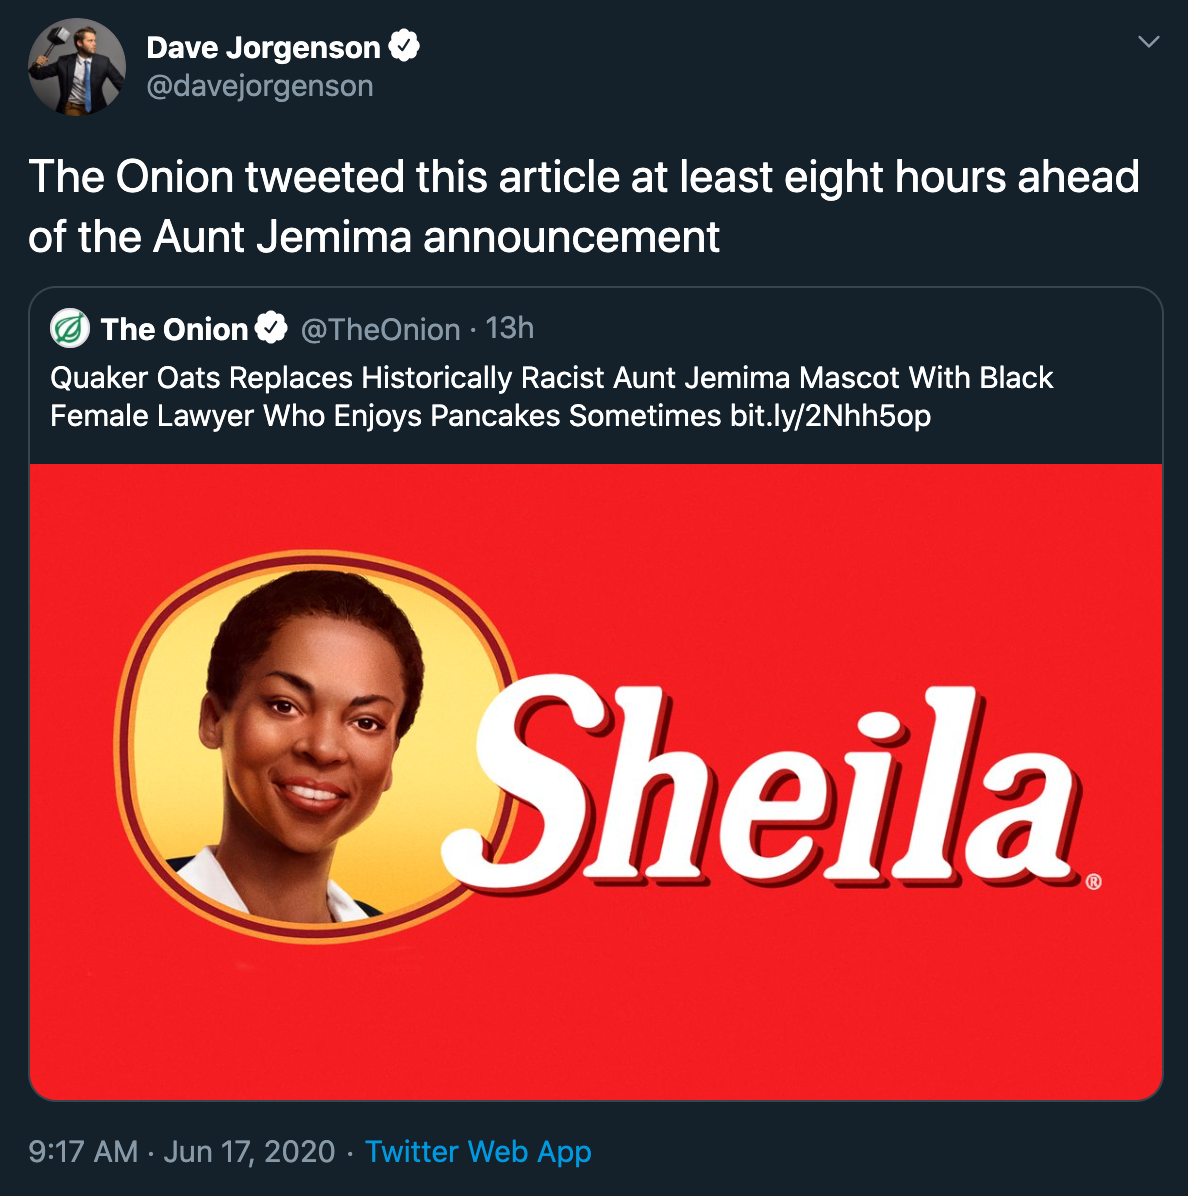 The Onion tweeted this article at least eight hours ahead of the Aunt Jemima announcement The Onion 13h Quaker Oats Replaces Historically Racist Aunt Jemima Mascot With Black Female Lawyer Who Enjoys Pancakes Sometimes